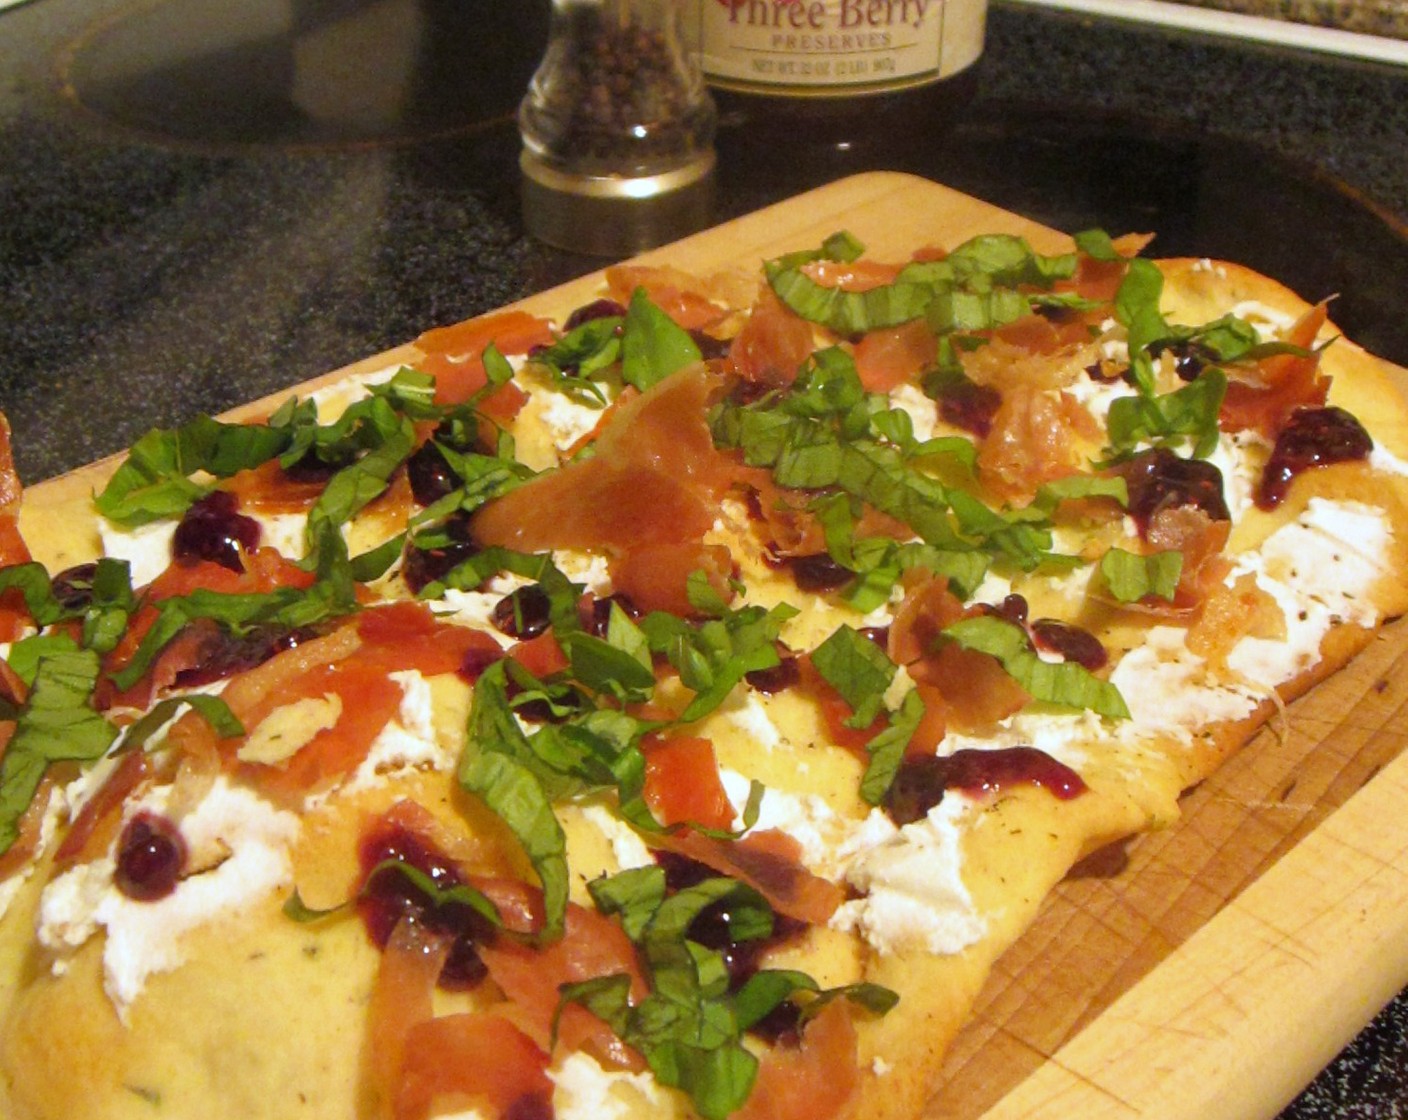 step 9 Once the flatbread is baked, spread the Goat Cheese (1/3 cup) and sprinkle crumbled prosciutto and ribbons of Fresh Basil Leaves (12) on top of the cheese. Repeat with the second flatbread. Drizzle the raspberry preserves on top of your lovely flatbreads and serve.